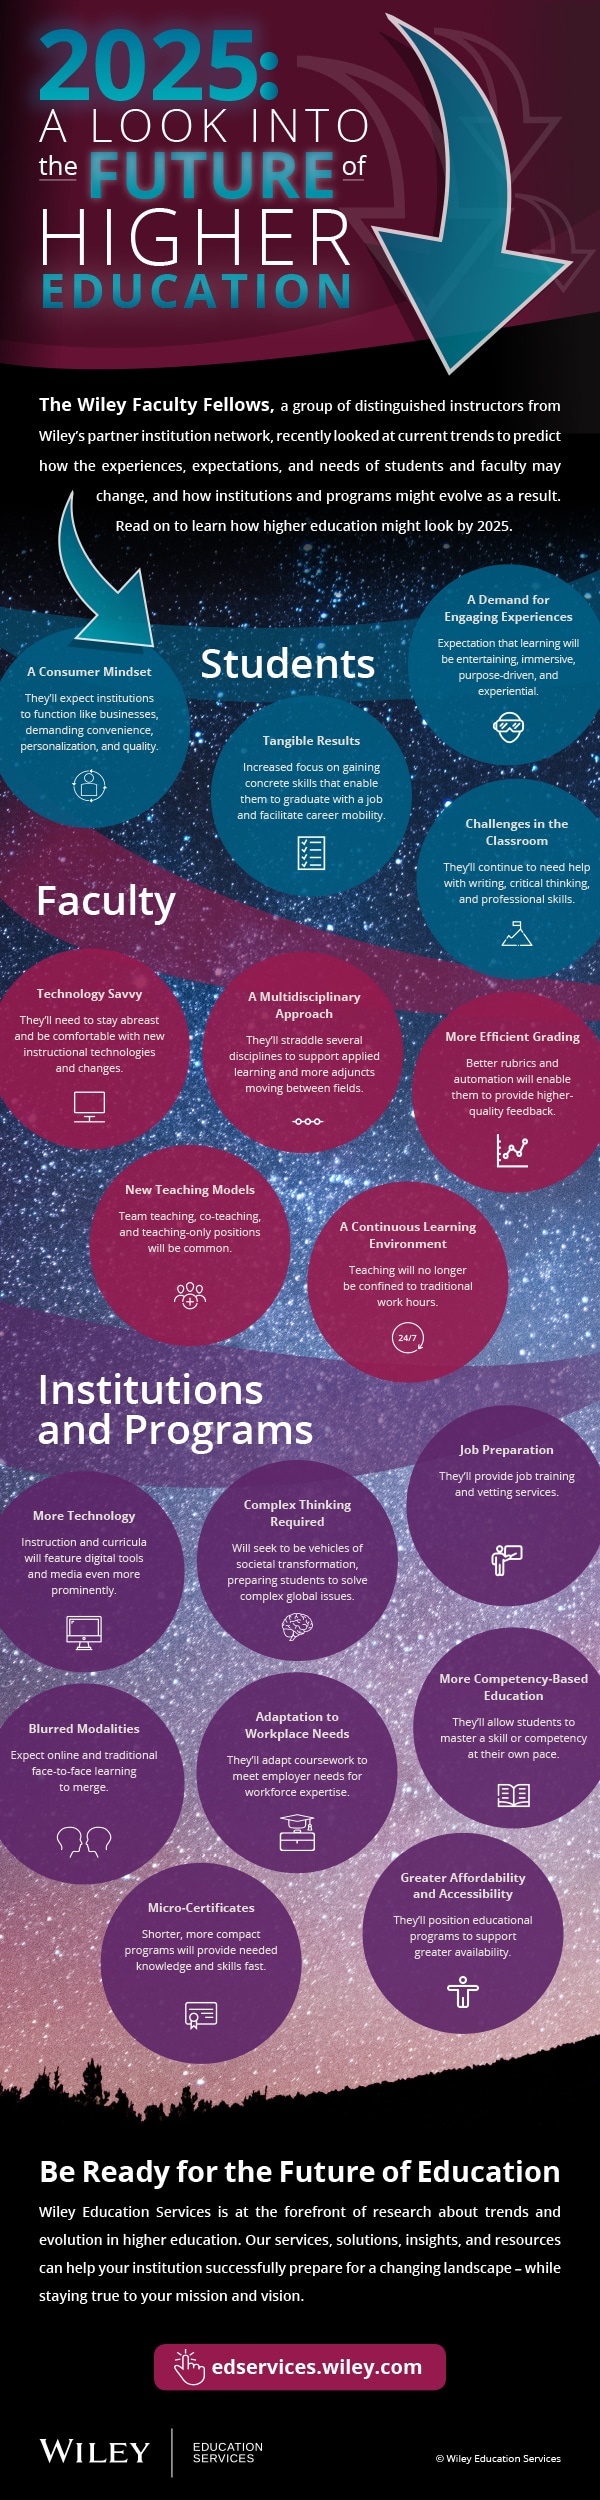 Infographic: Learn what a group of faculty believe the future of higher education will look like for students, institutions and programs, and faculty.